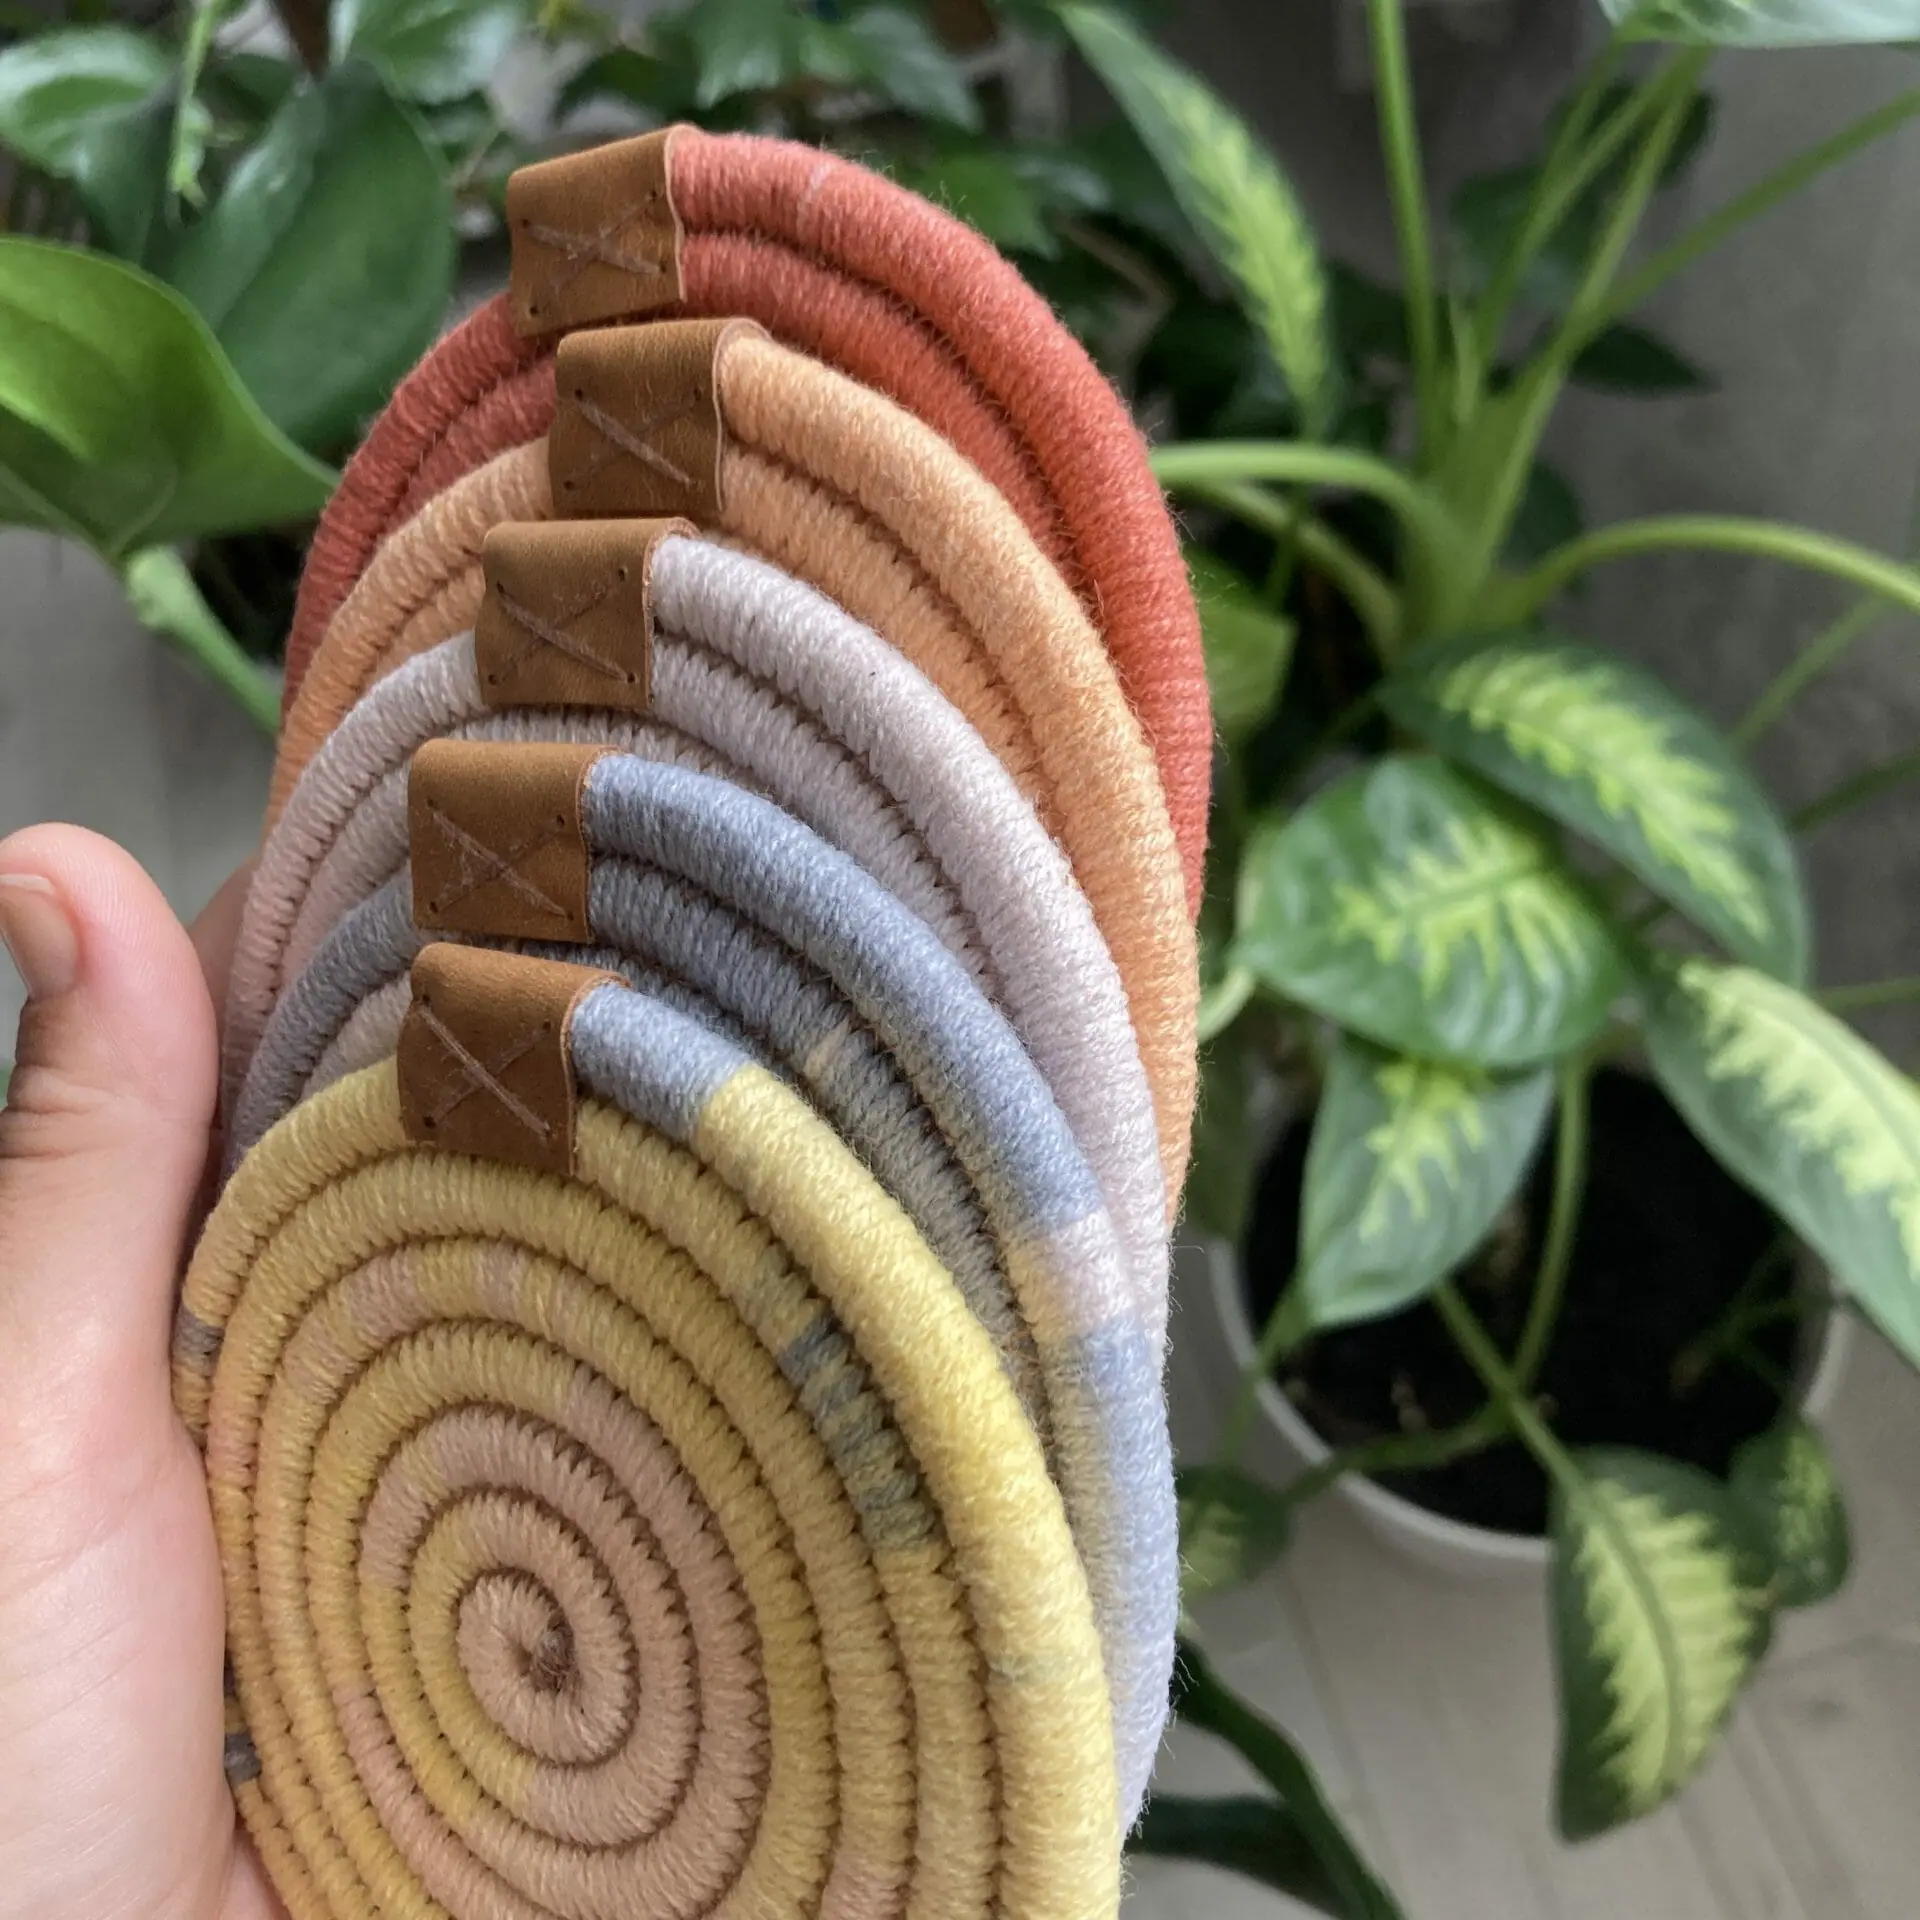 Colorful mug stands set of 5 Rope coasters